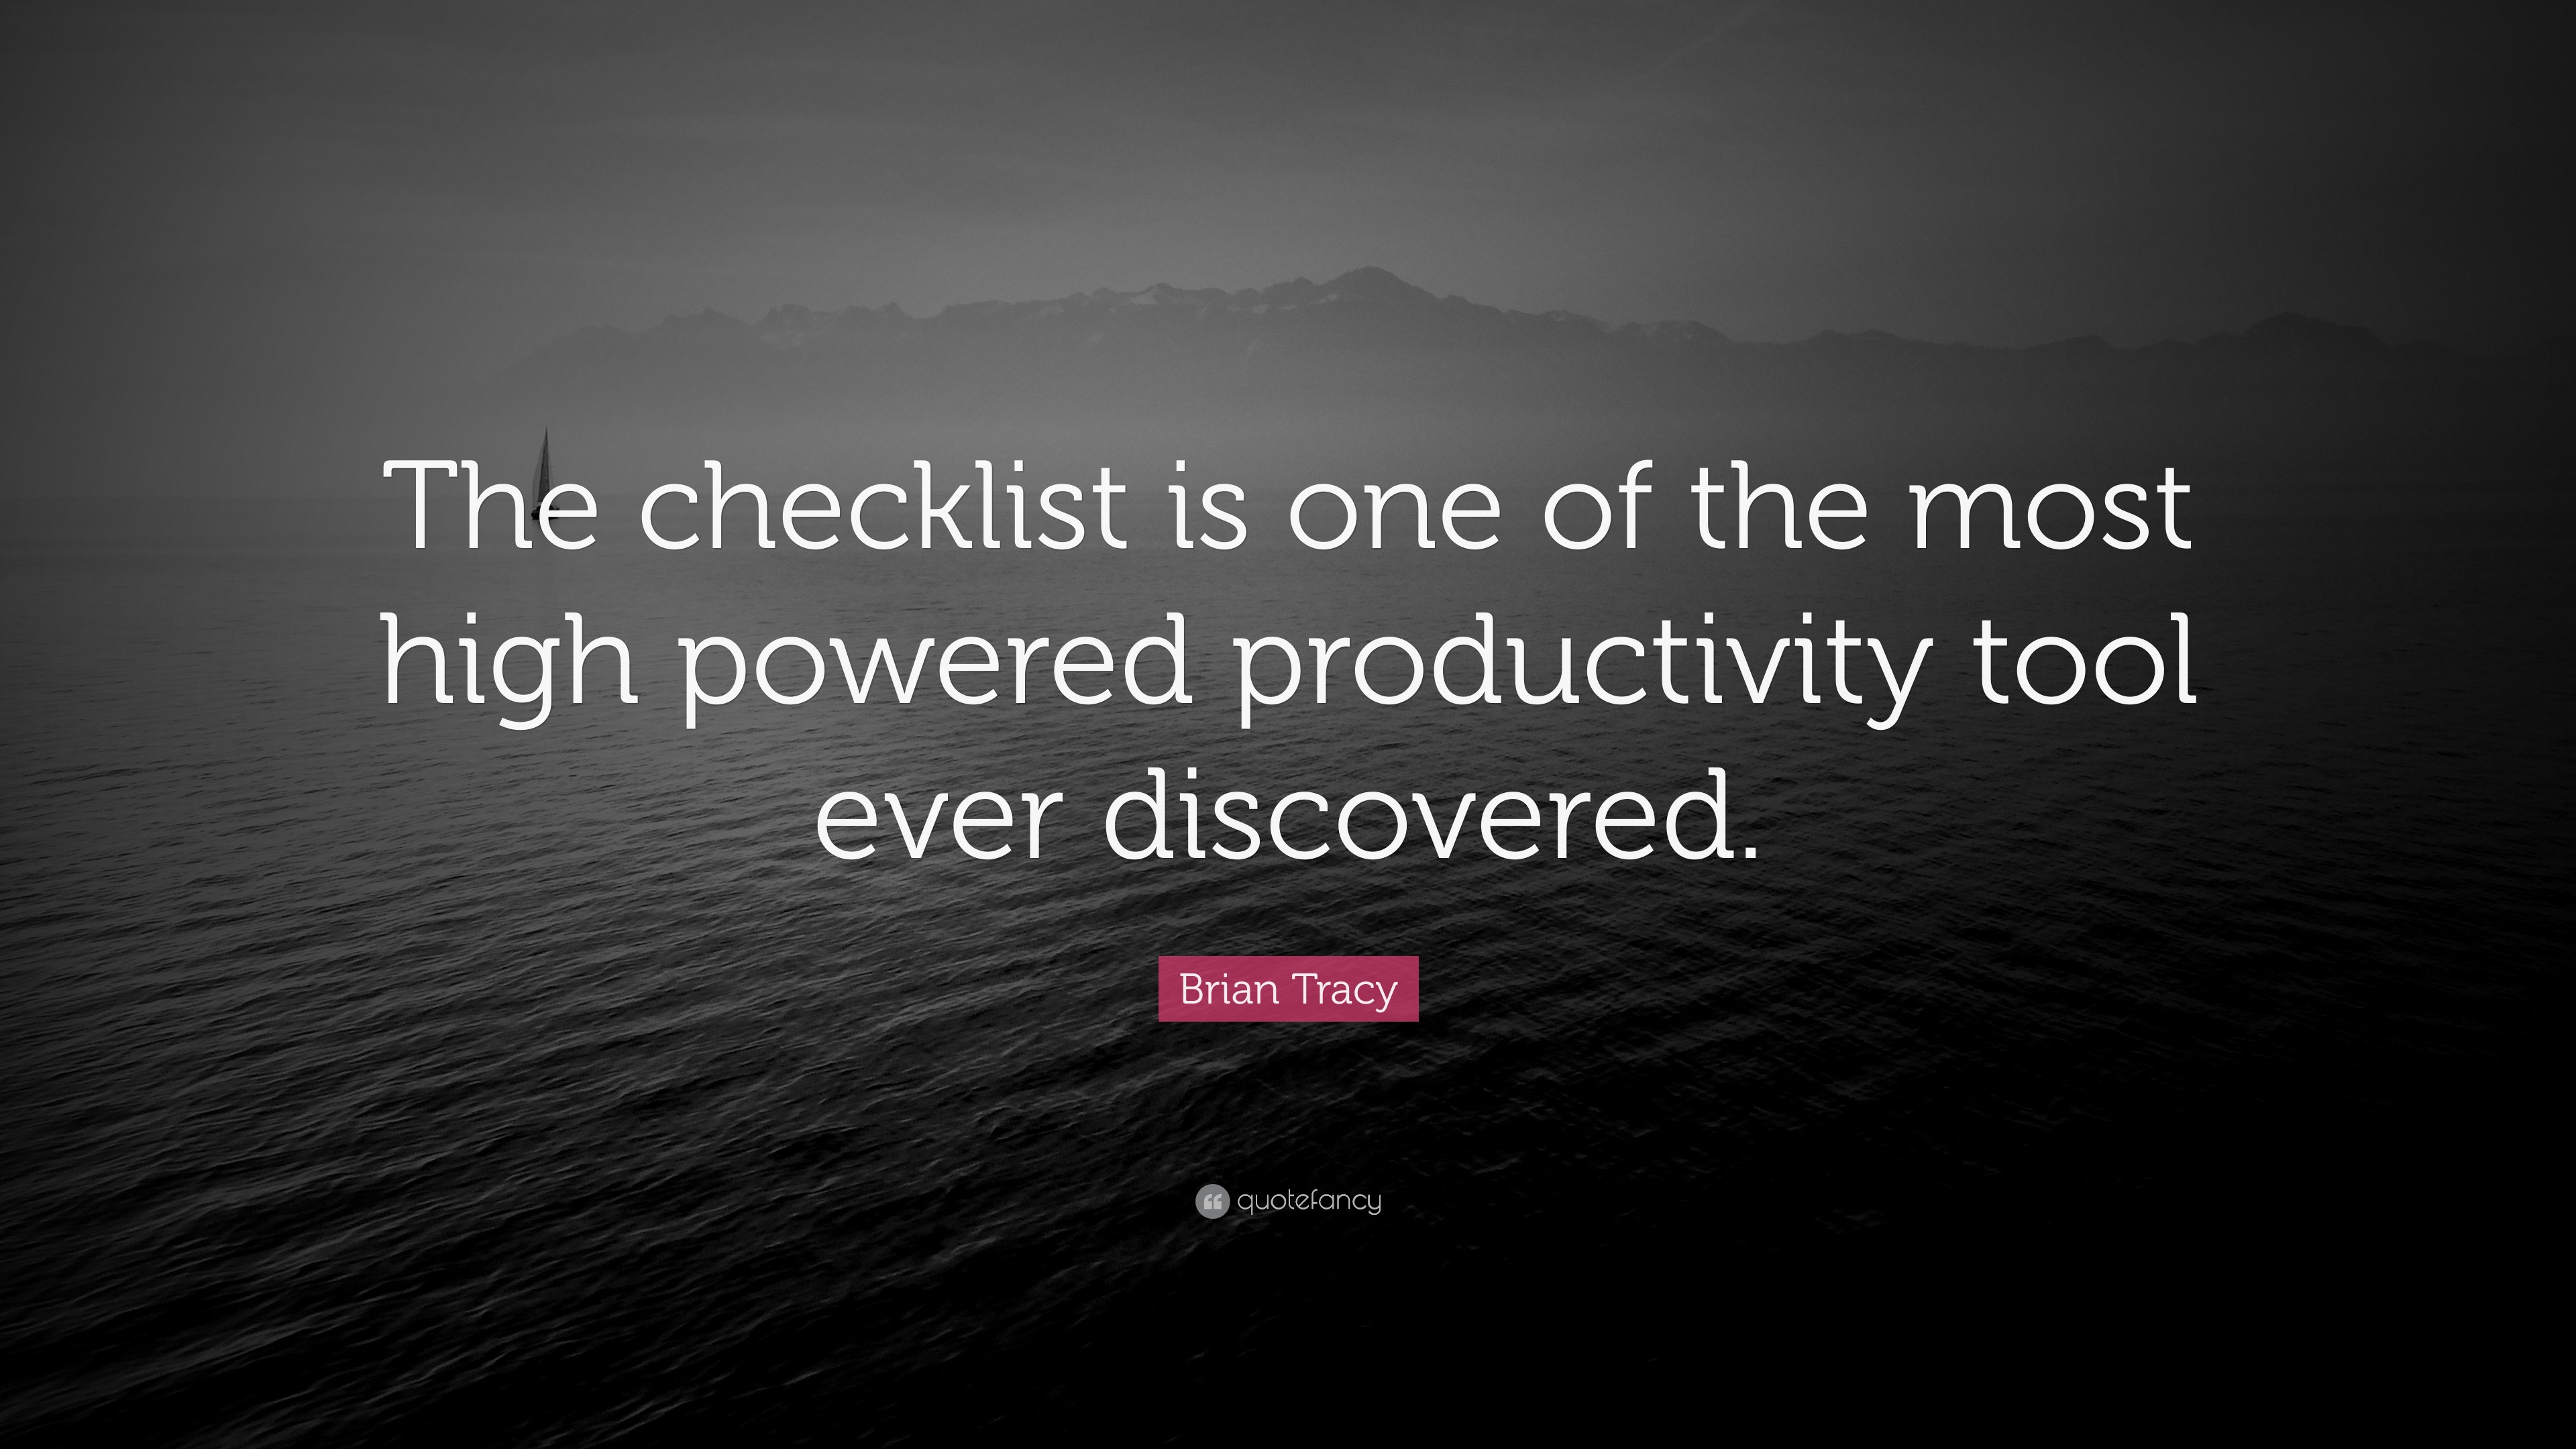 Brian Tracy Quote: “The checklist is one of the most high powered  productivity tool ever discovered.”